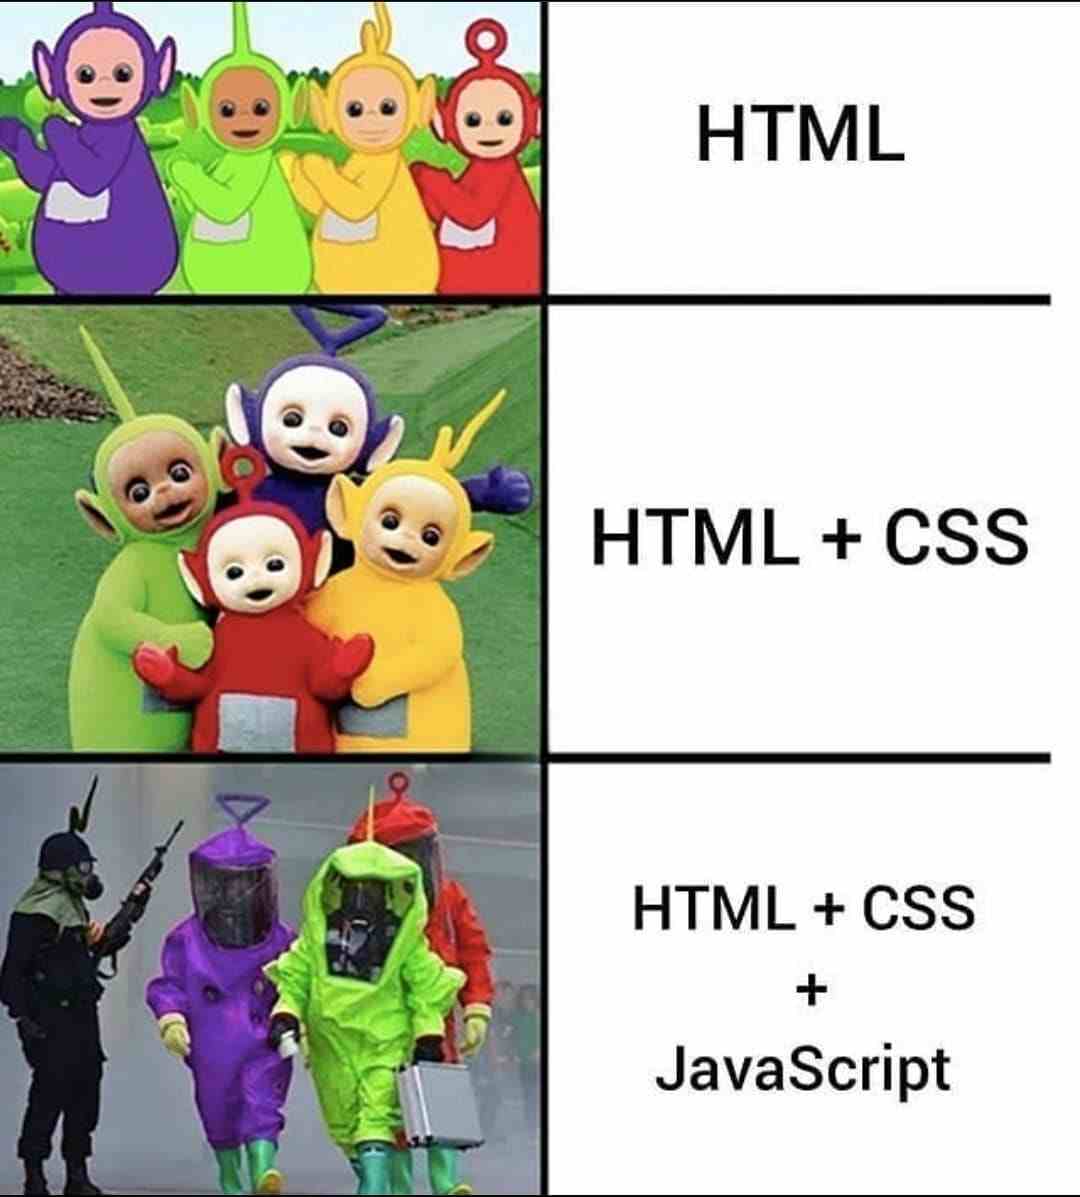 Simple explanation of HTML, CSS and JavaScript